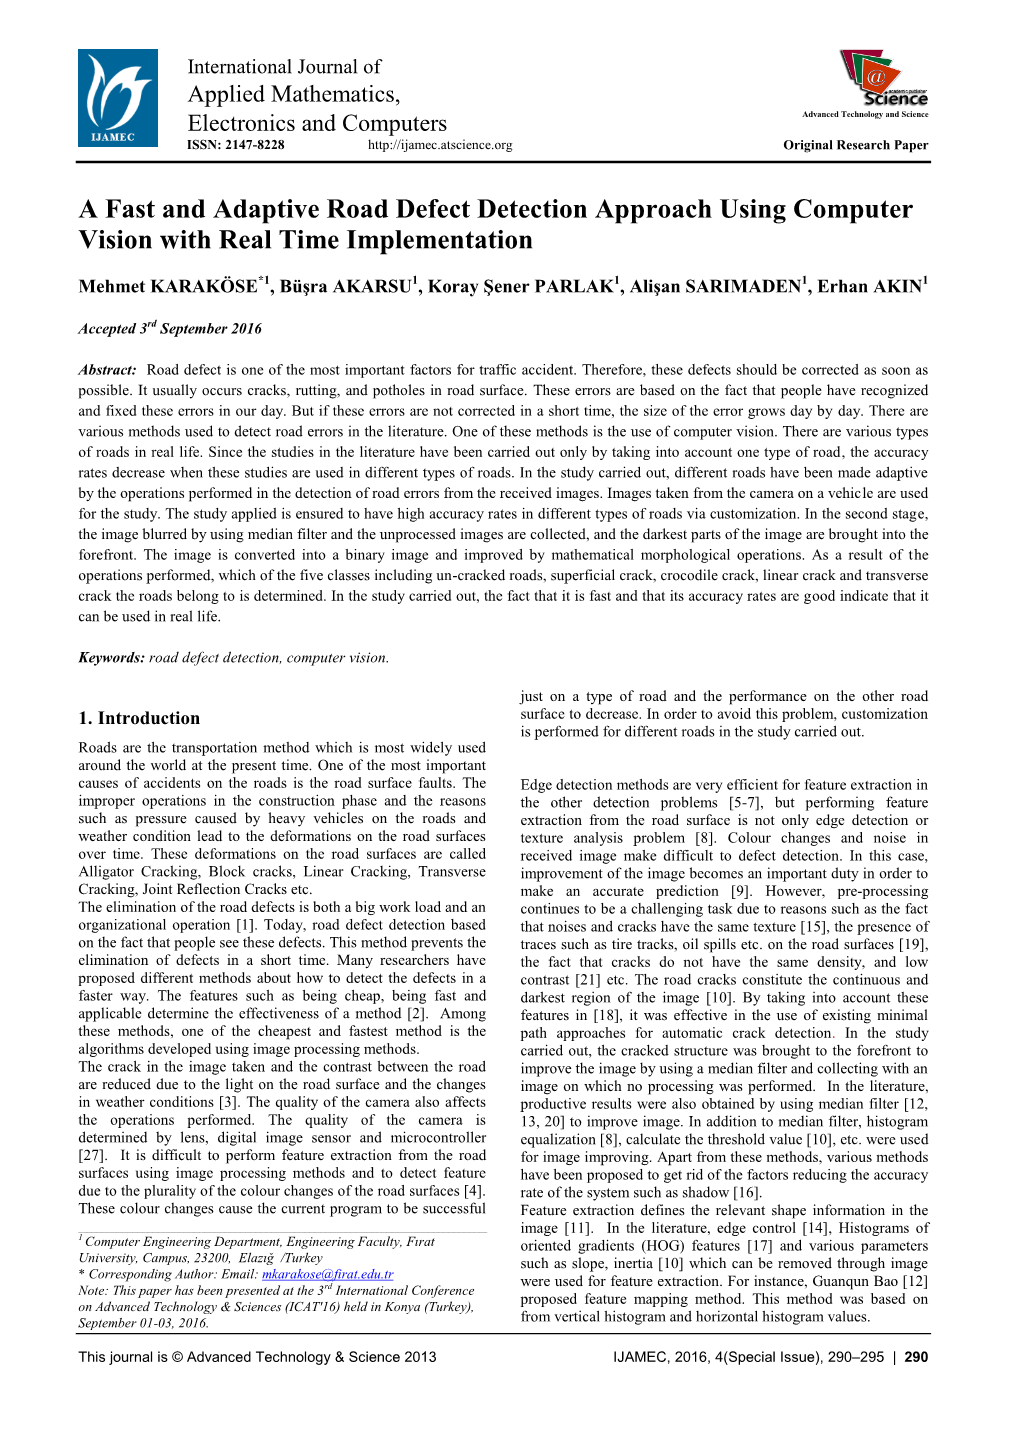 A Fast and Adaptive Road Defect Detection Approach Using Computer Vision with Real Time Implementation